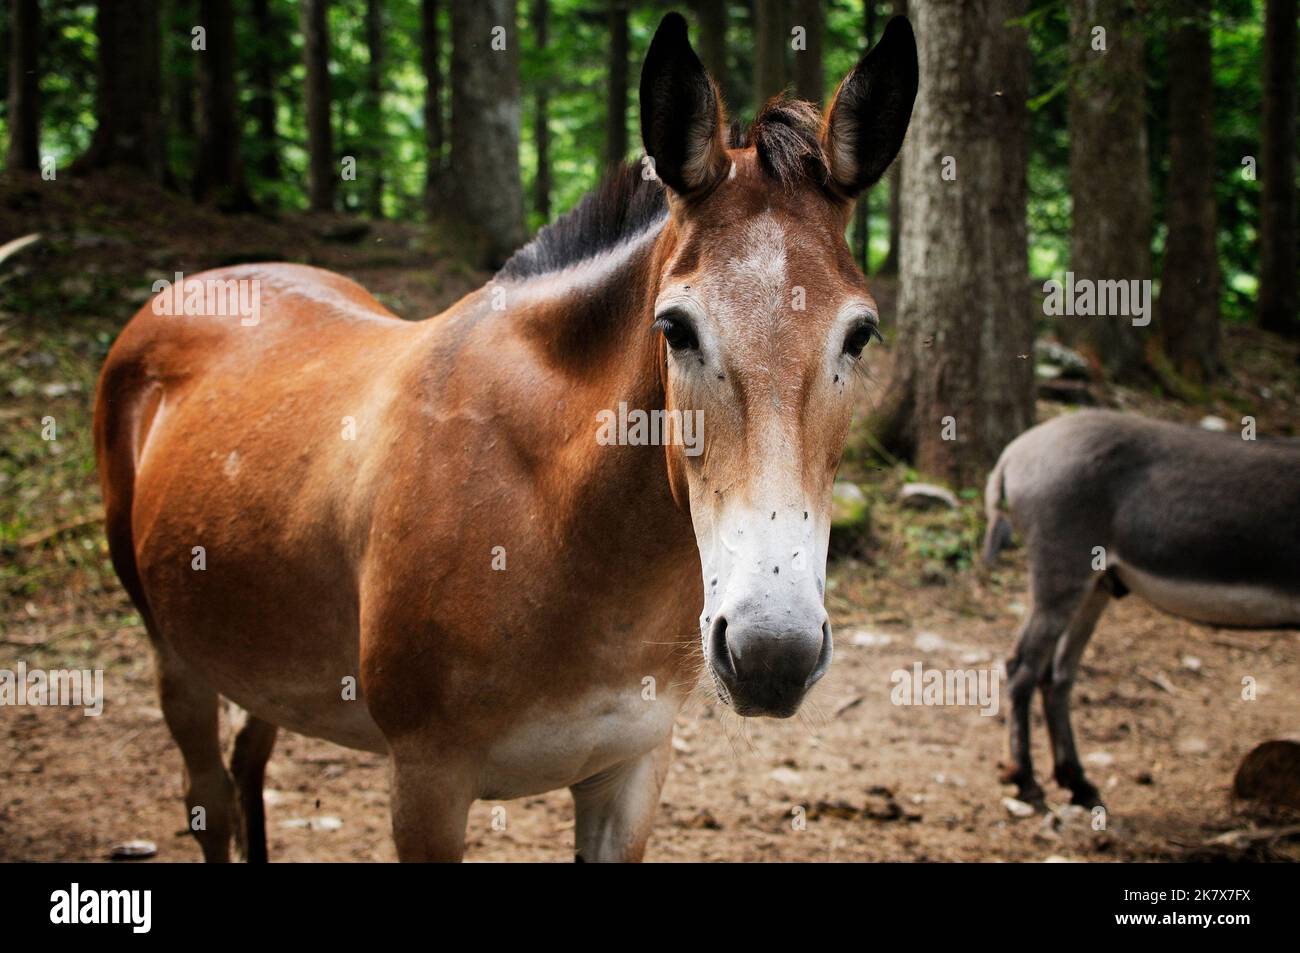 Muzzle of brown mule Stock Photo